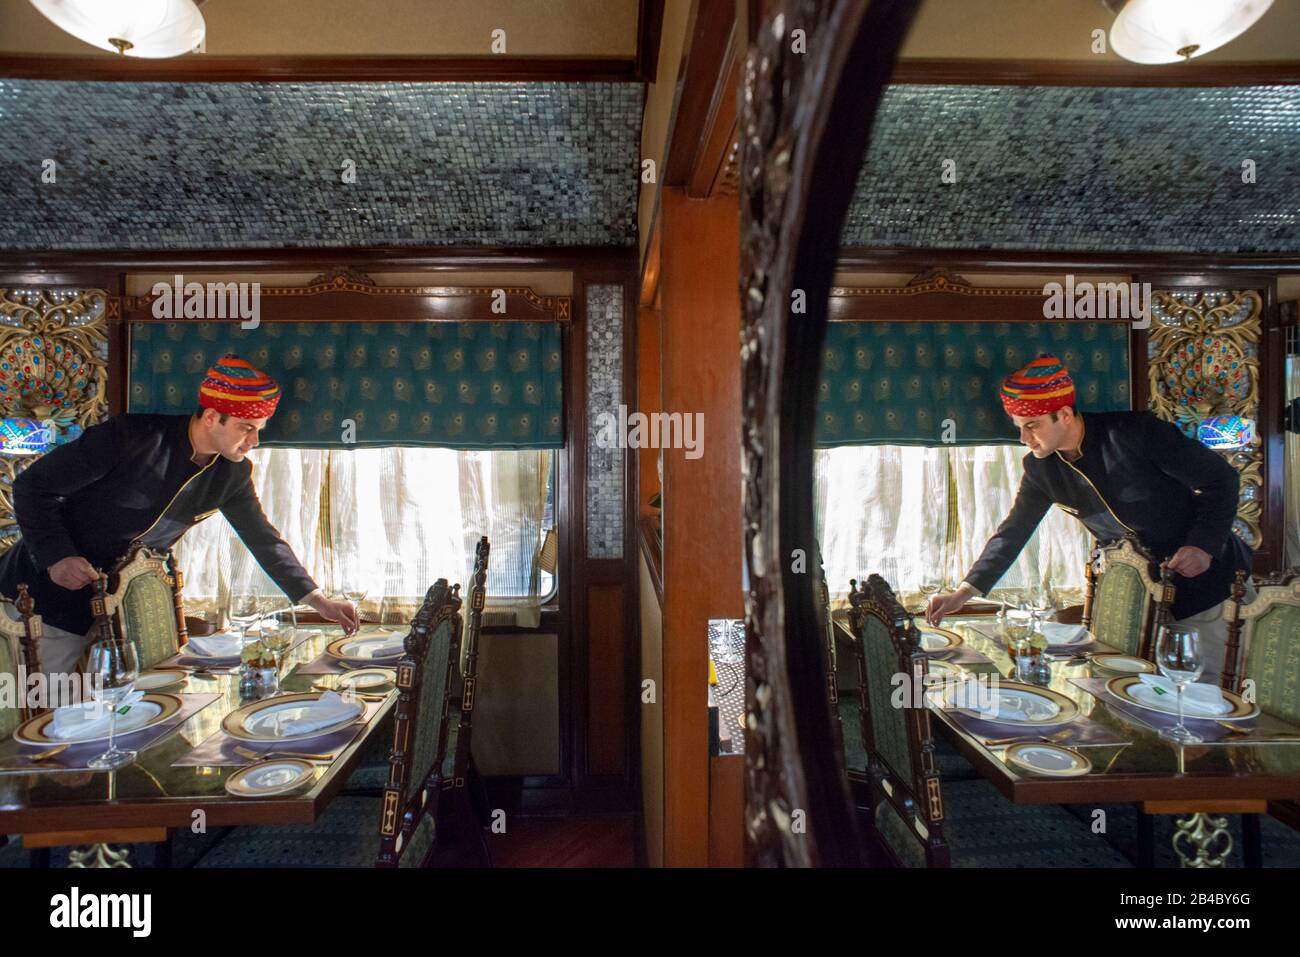 Inside one of the dining cars of the Luxury train Maharajas express train. Rajasthan Jodhpur Rajasthan India. Stock Photo